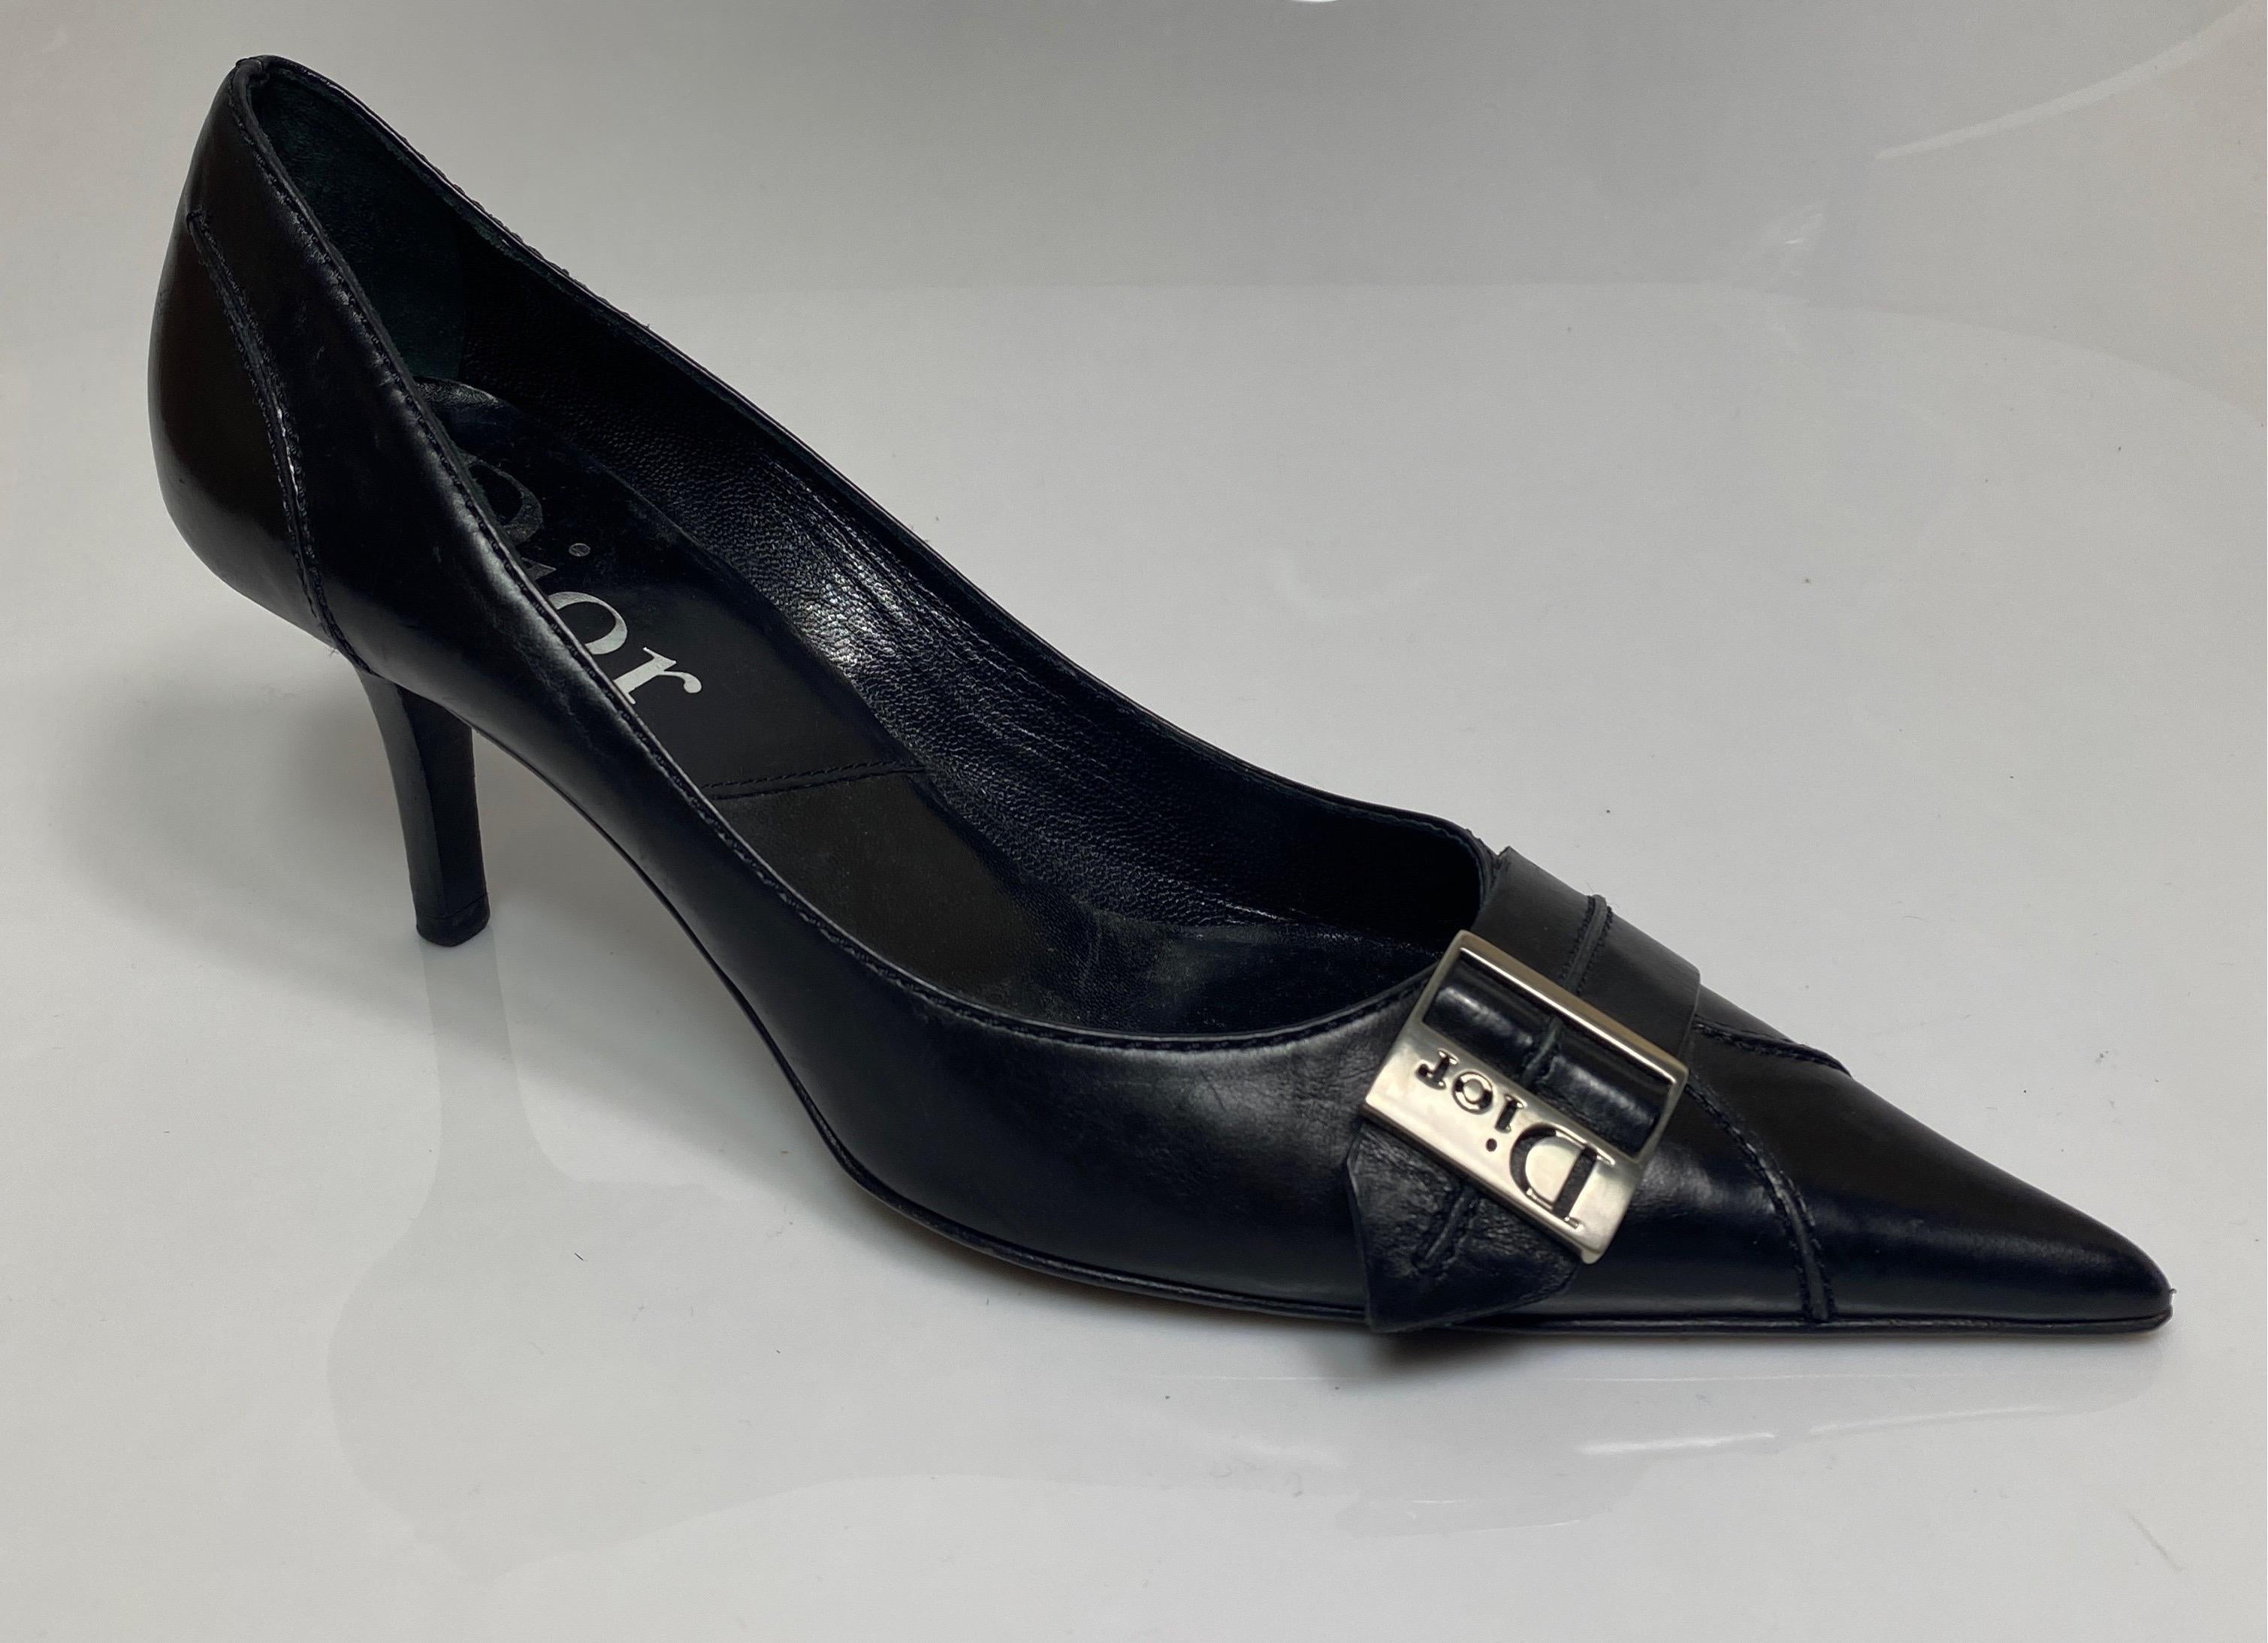 Christian Dior Vintage Black Leather Pump with Silver Dior Buckle-Size 37.5. These vintage shoes are from the early 2000’s and are as described:
Pointy toe box
1.25” Leather decorative detail with Silver Dior Buckle
Stitching detail in the front of